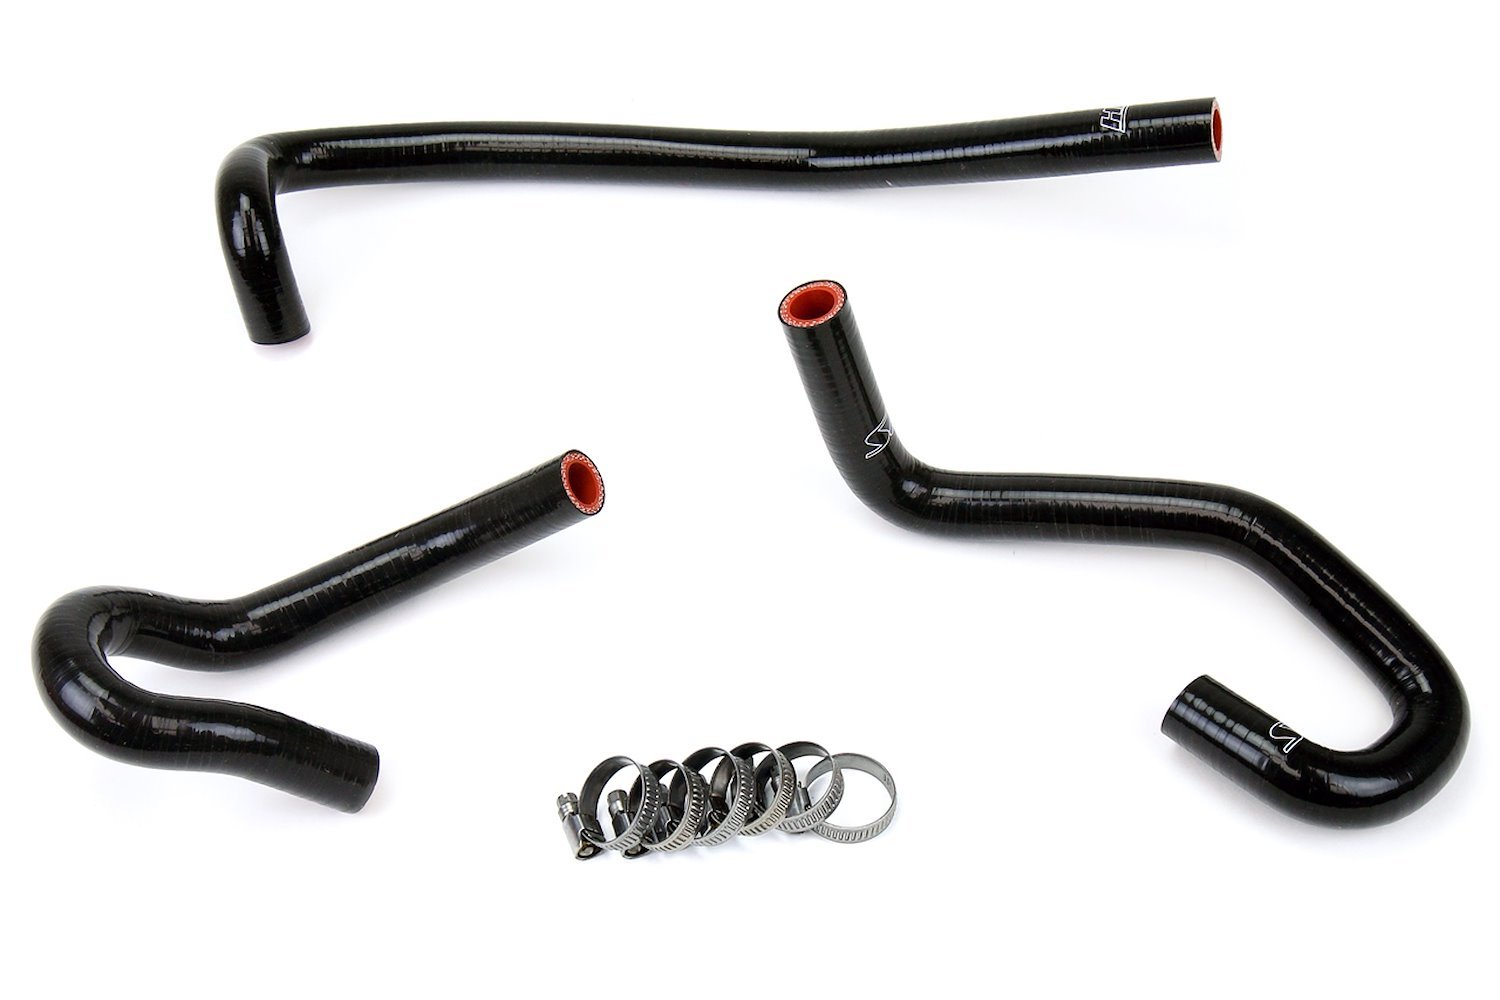 57-1340-BLK Heater Hose Kit, High-Temp 3-Ply Reinforced Silicone, Replace OEM Rubber Heater Coolant Hoses